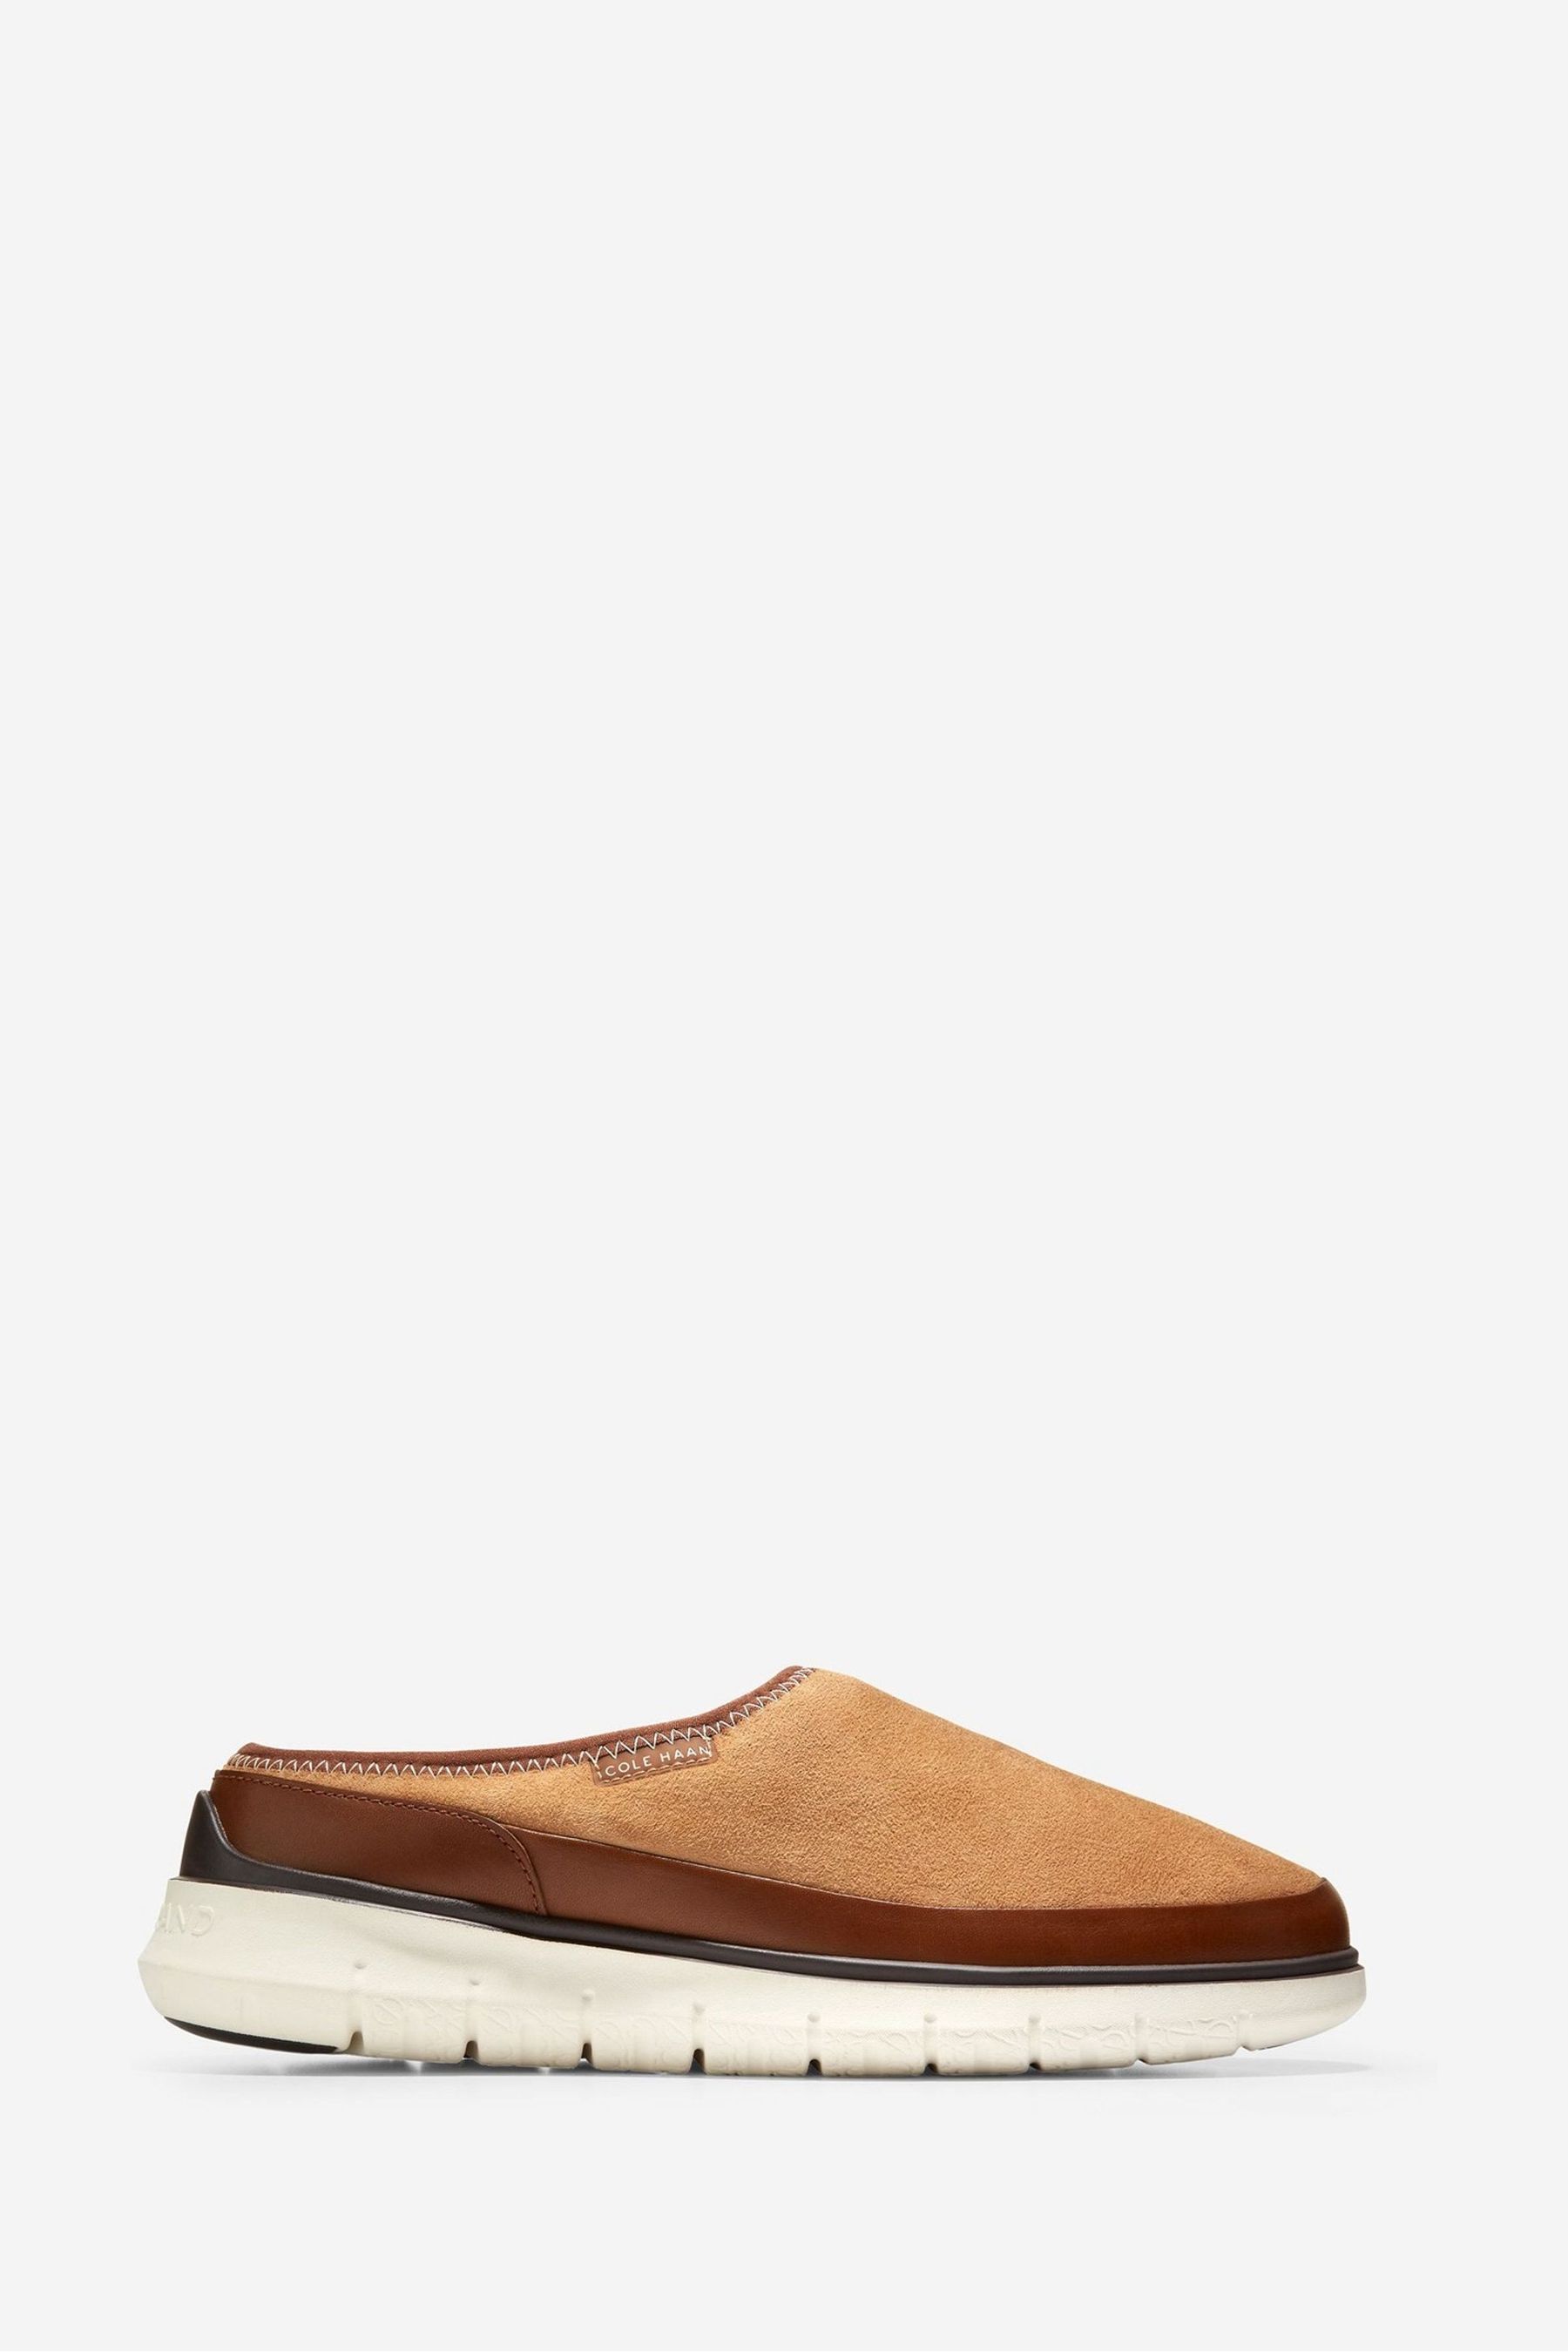 Buy Cole Haan Mens Cream Generation Zerogrand Dweller Slippers from the ...